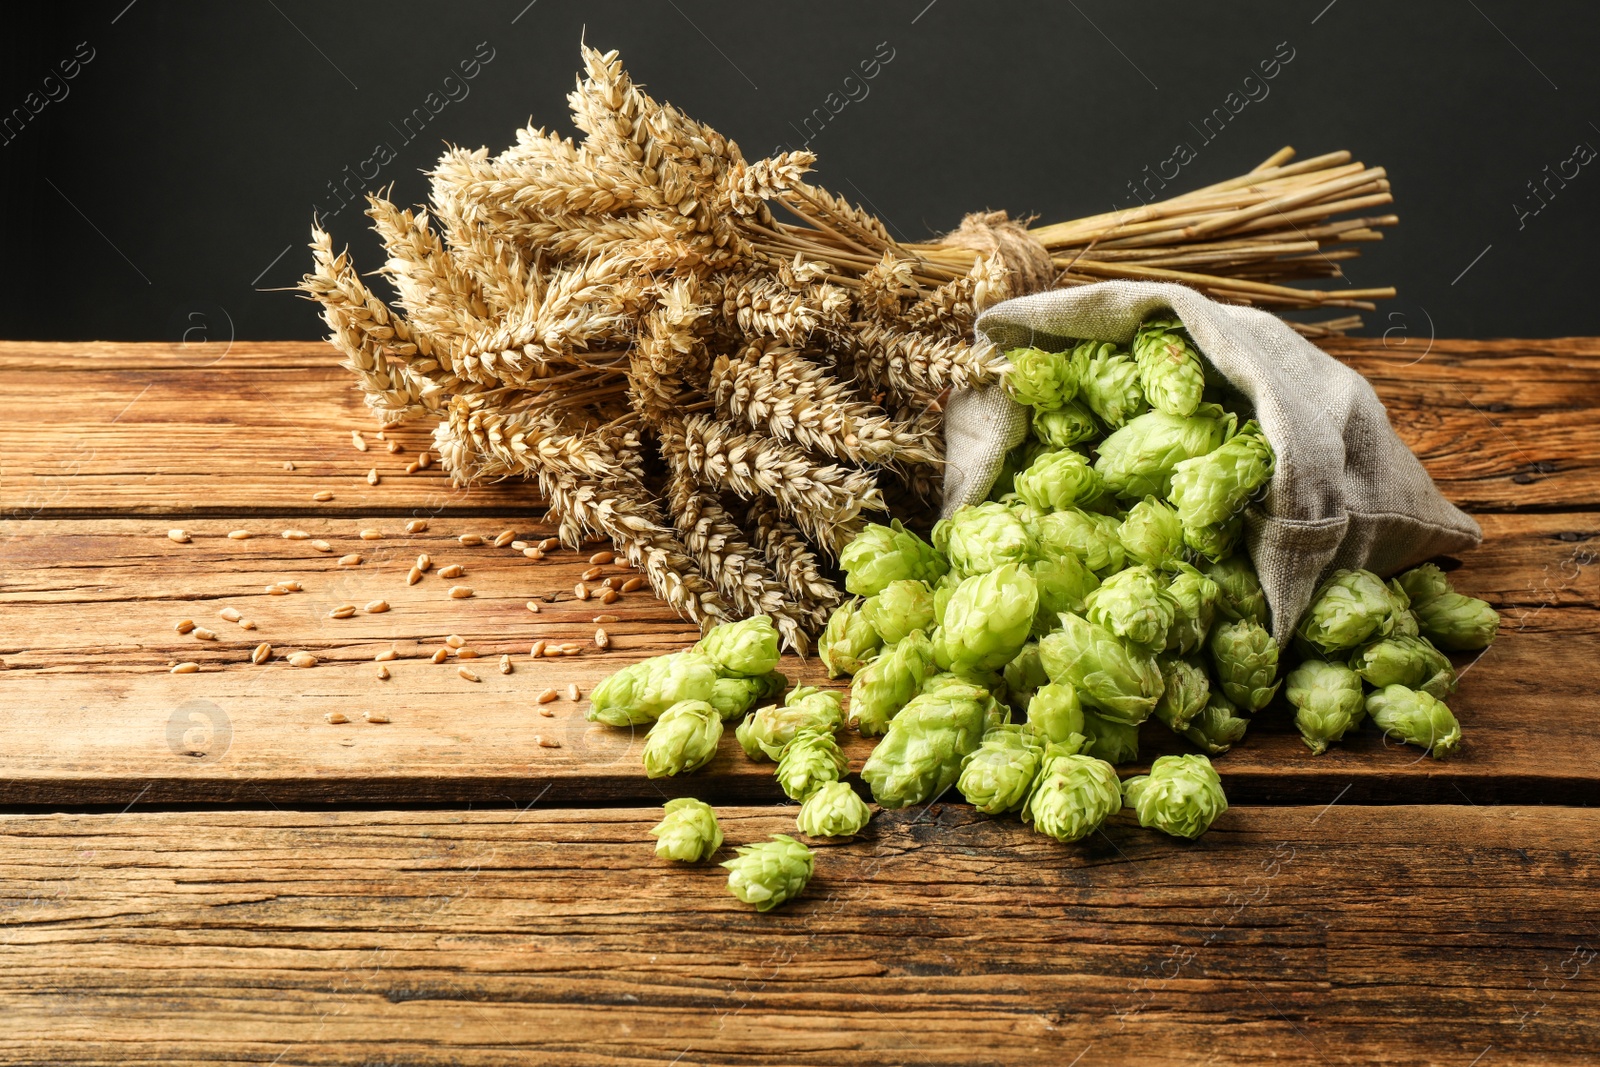 Photo of Overturned sack of hop flowers and wheat ears on wooden table against grey background